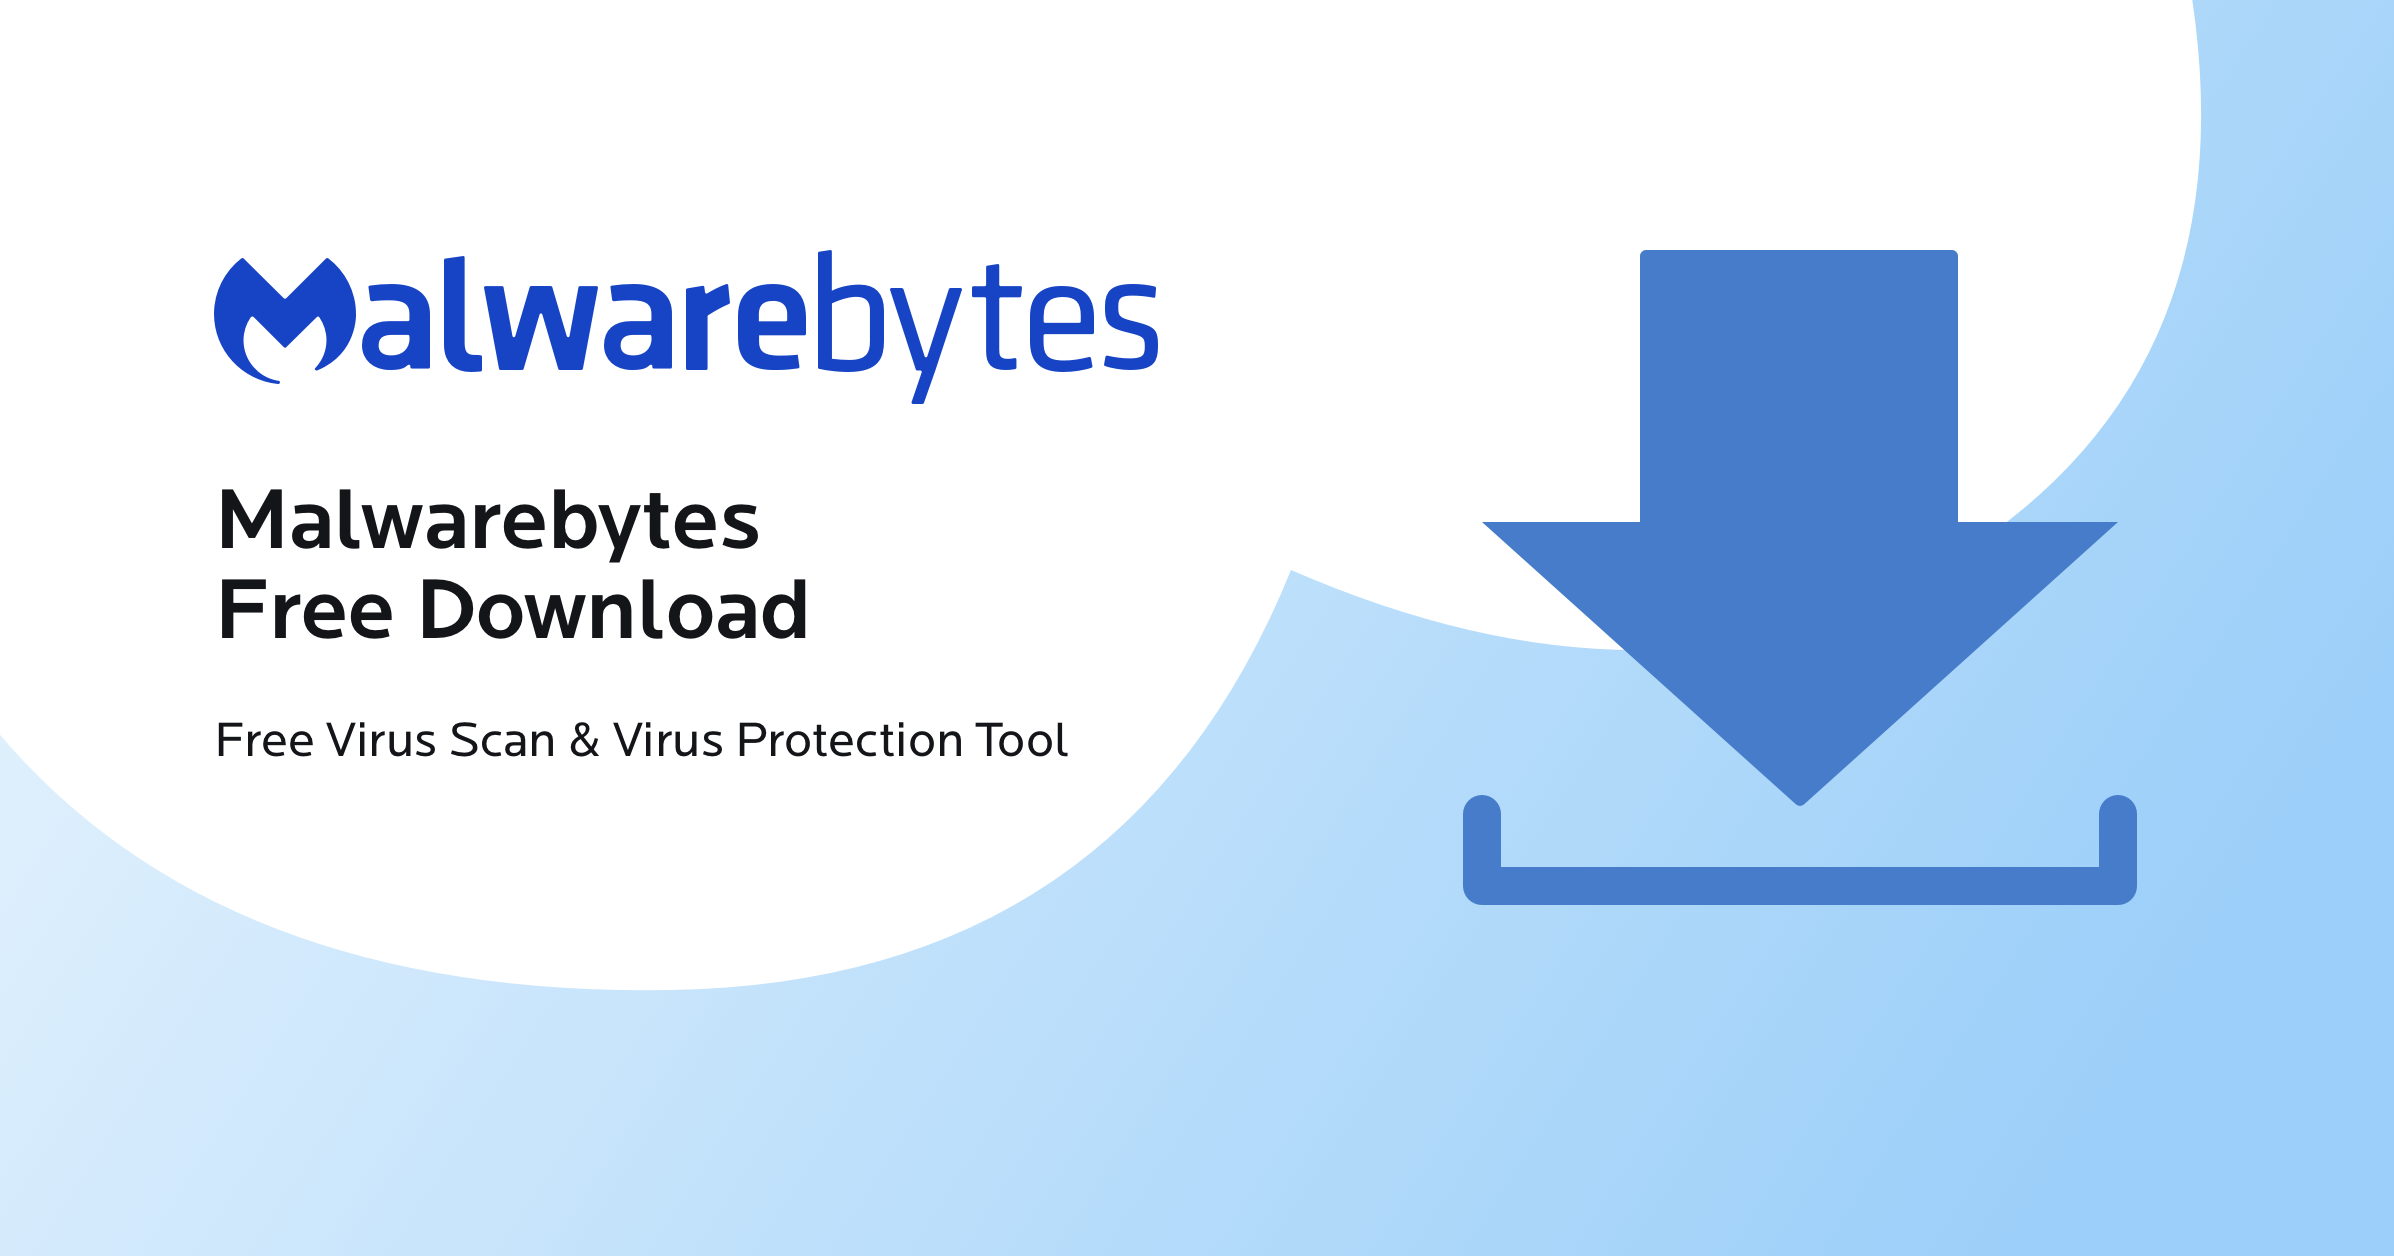 Download and install a reliable anti-malware software such as Malwarebytes
Run a full system scan